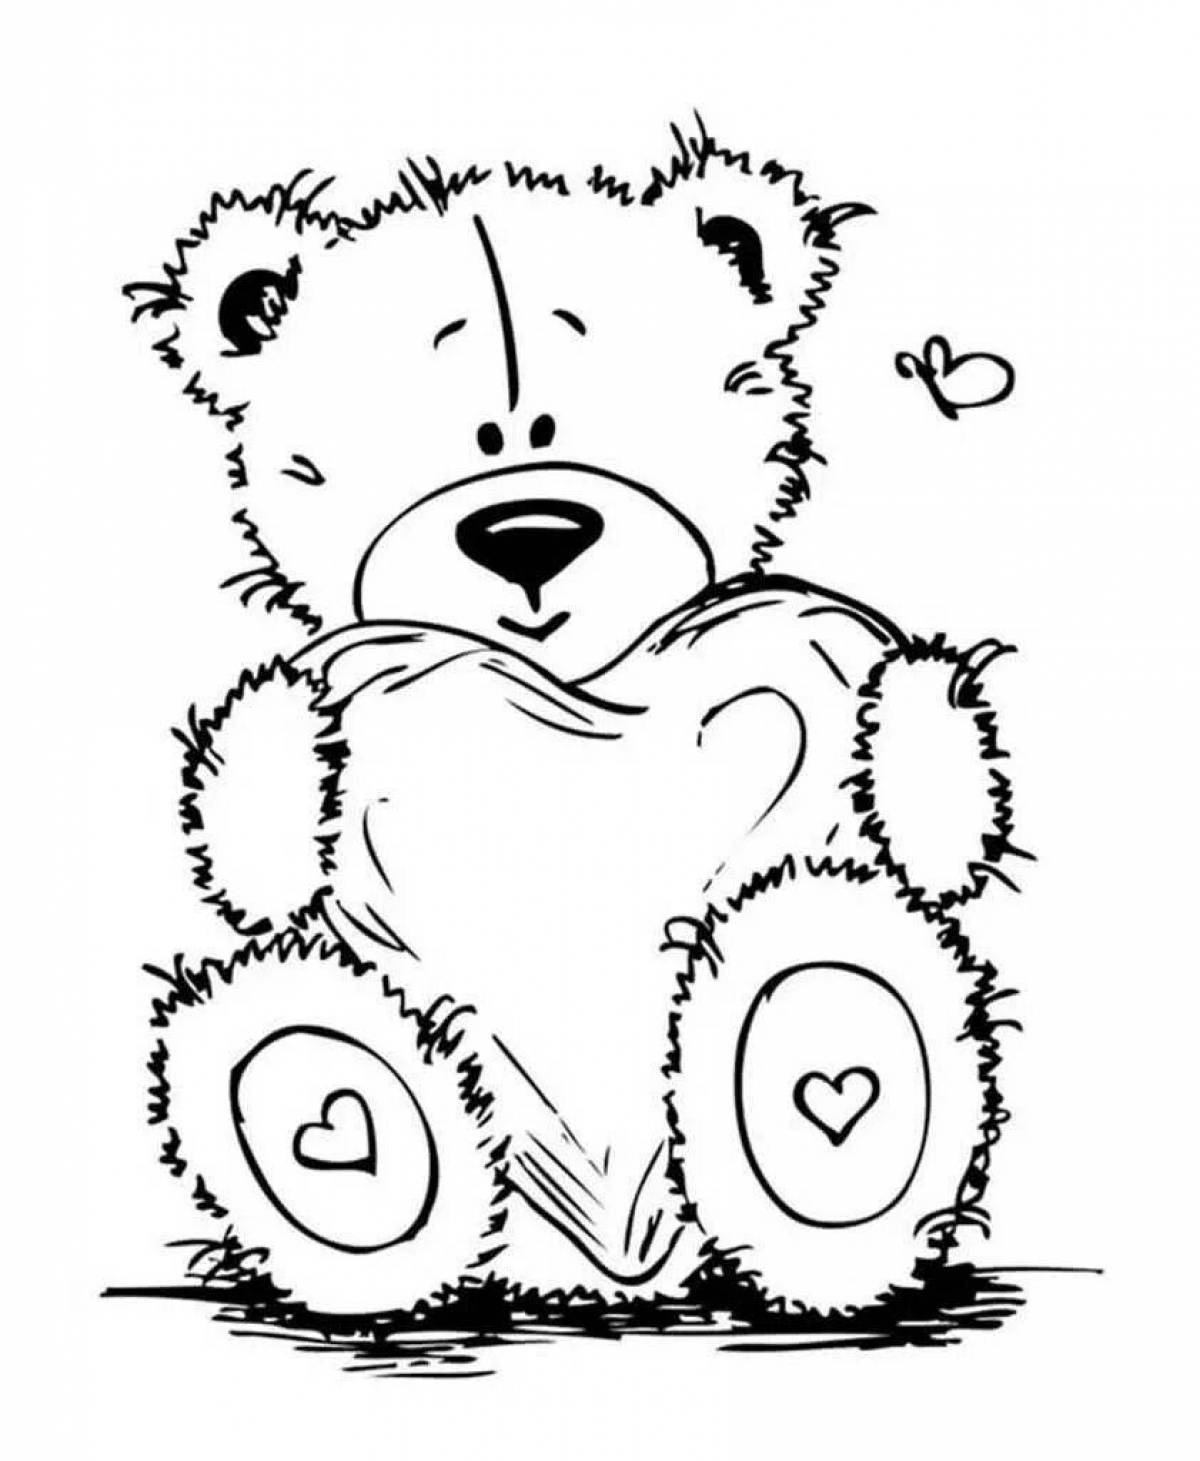 Colorful teddy bear with a heart coloring book